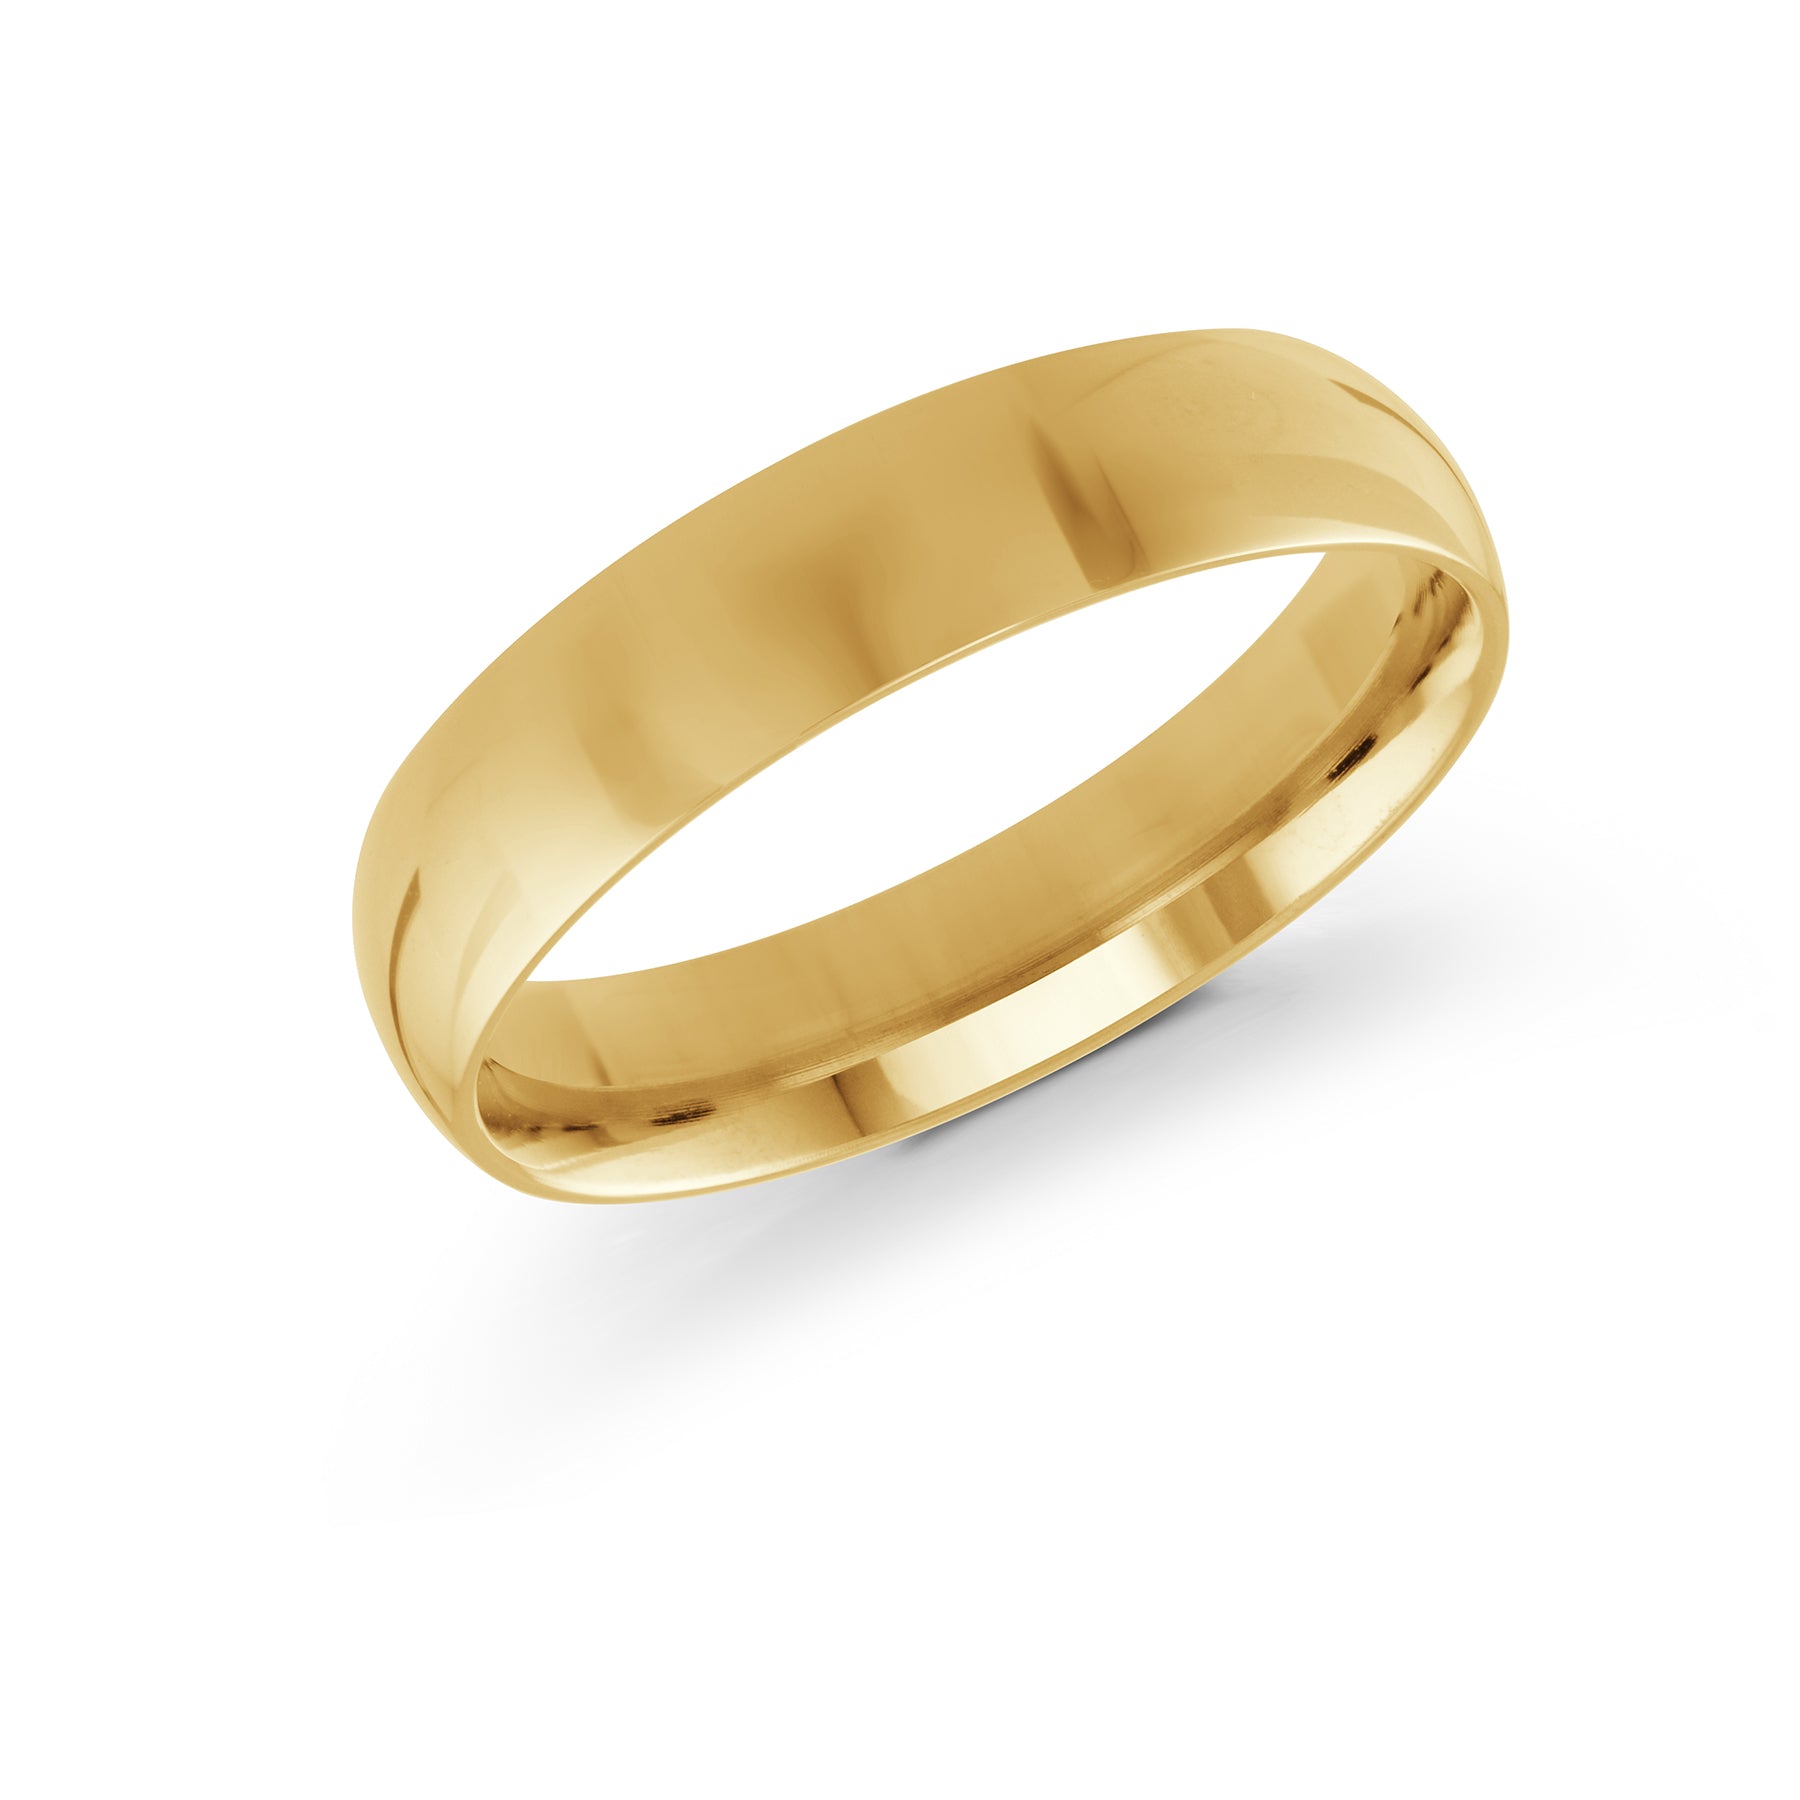 High-Polished Domed 5mm Wedding Band Gold Yellow